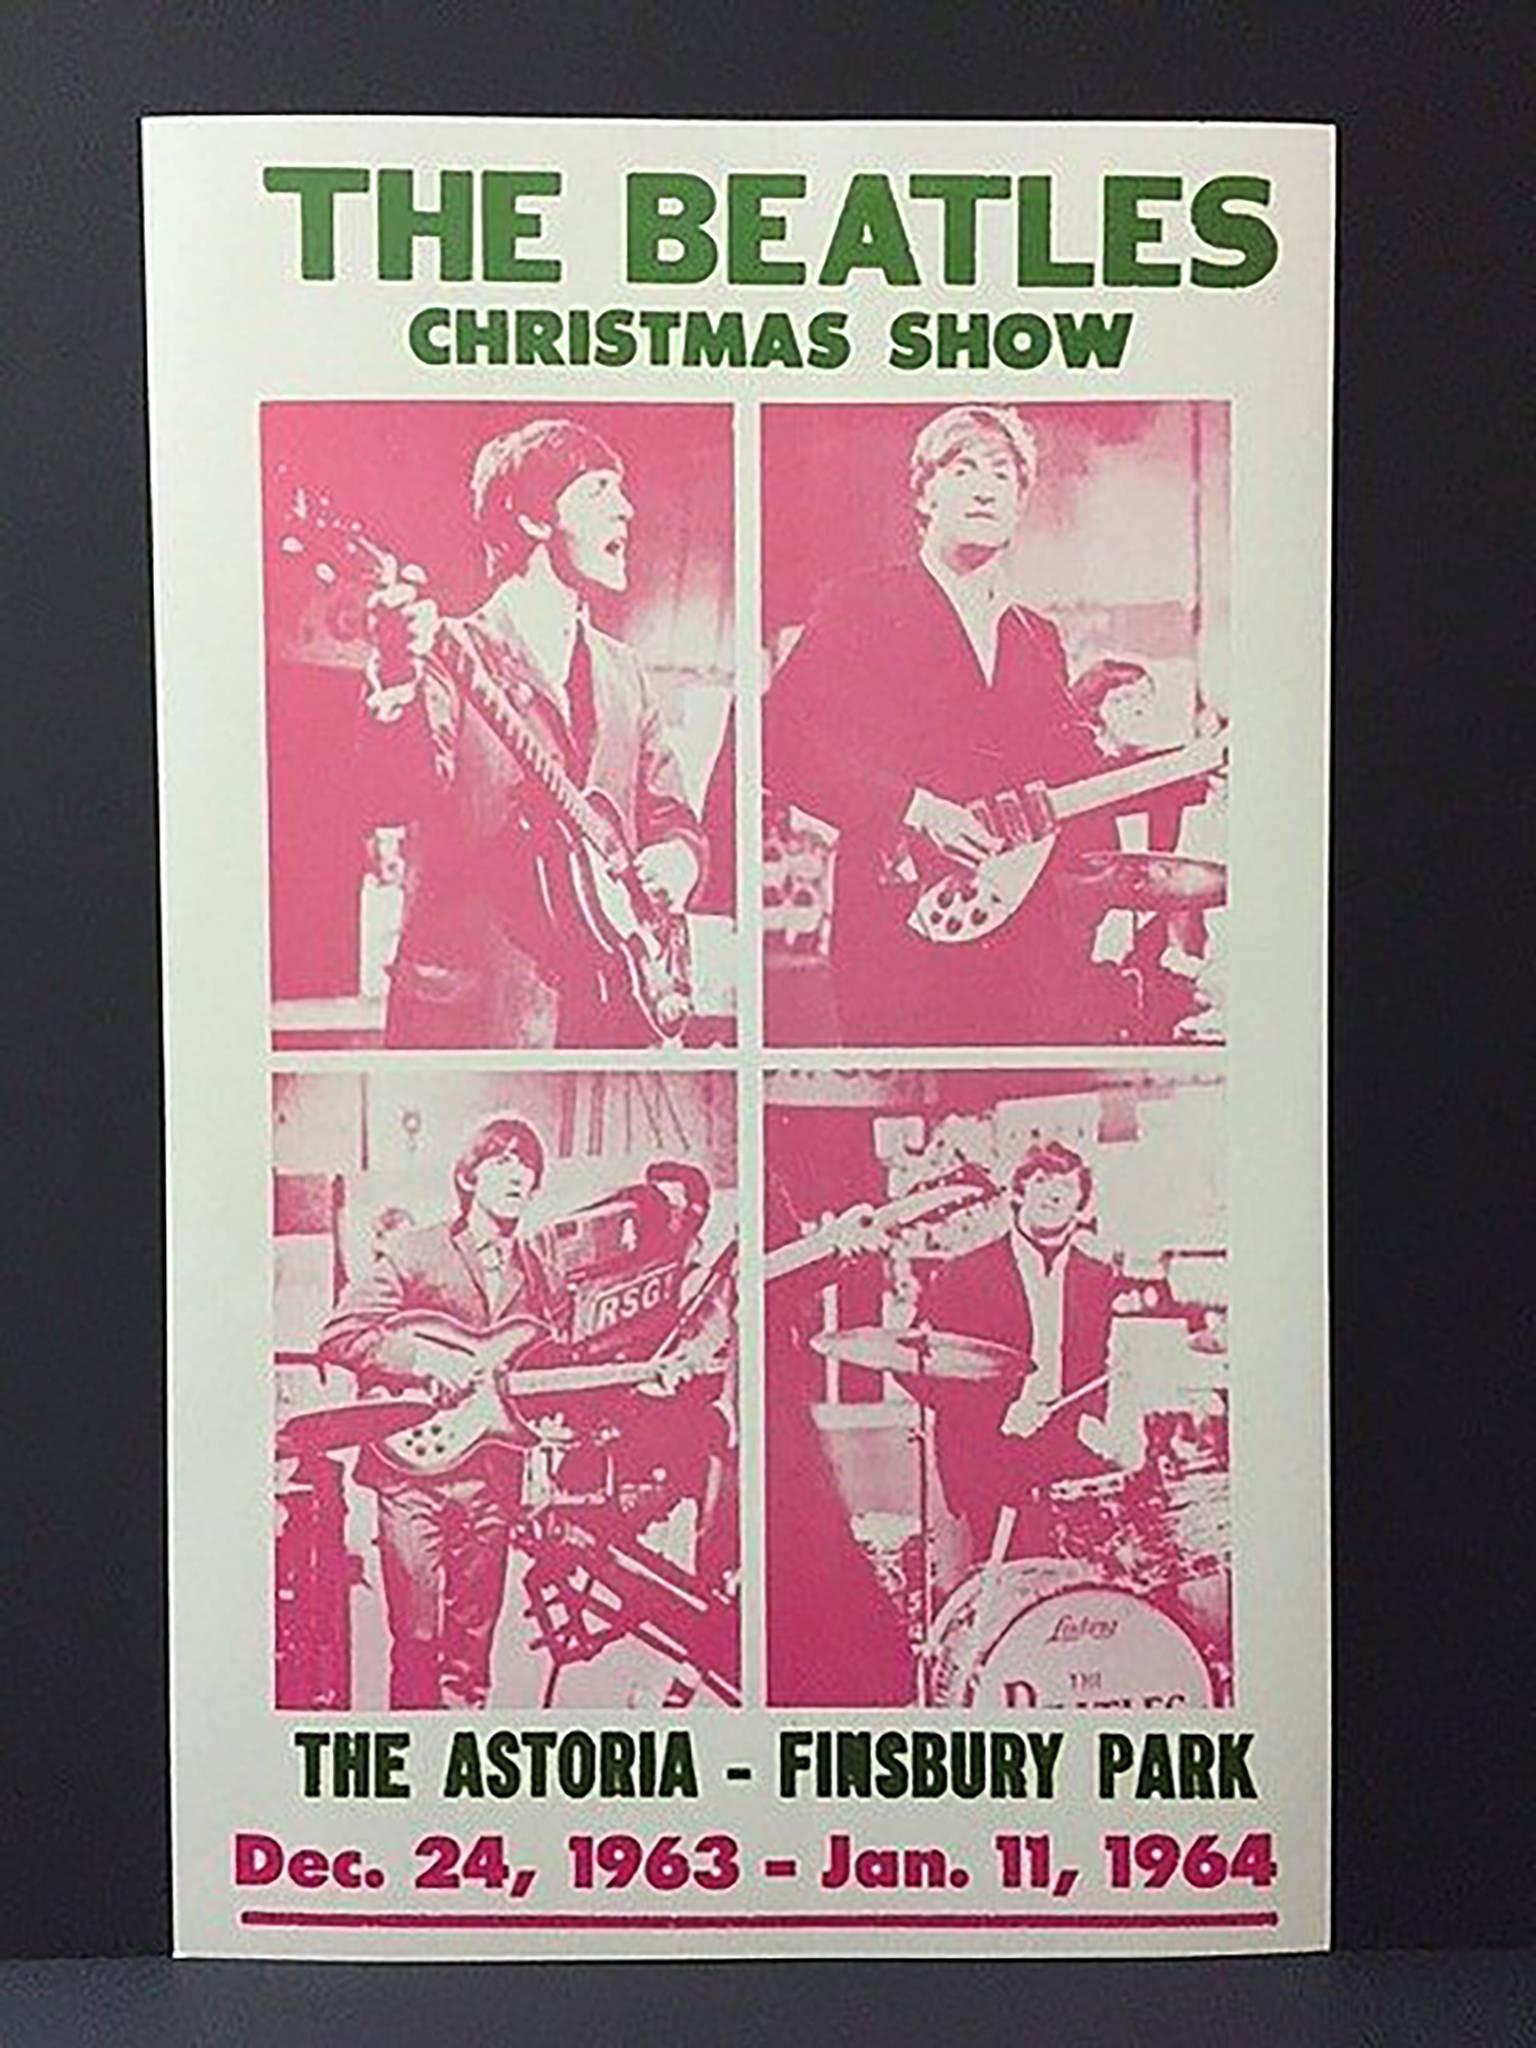 Original Beatles in “Christmas Show” Concert Poster – December 24th 1963 - Art by The Beatles